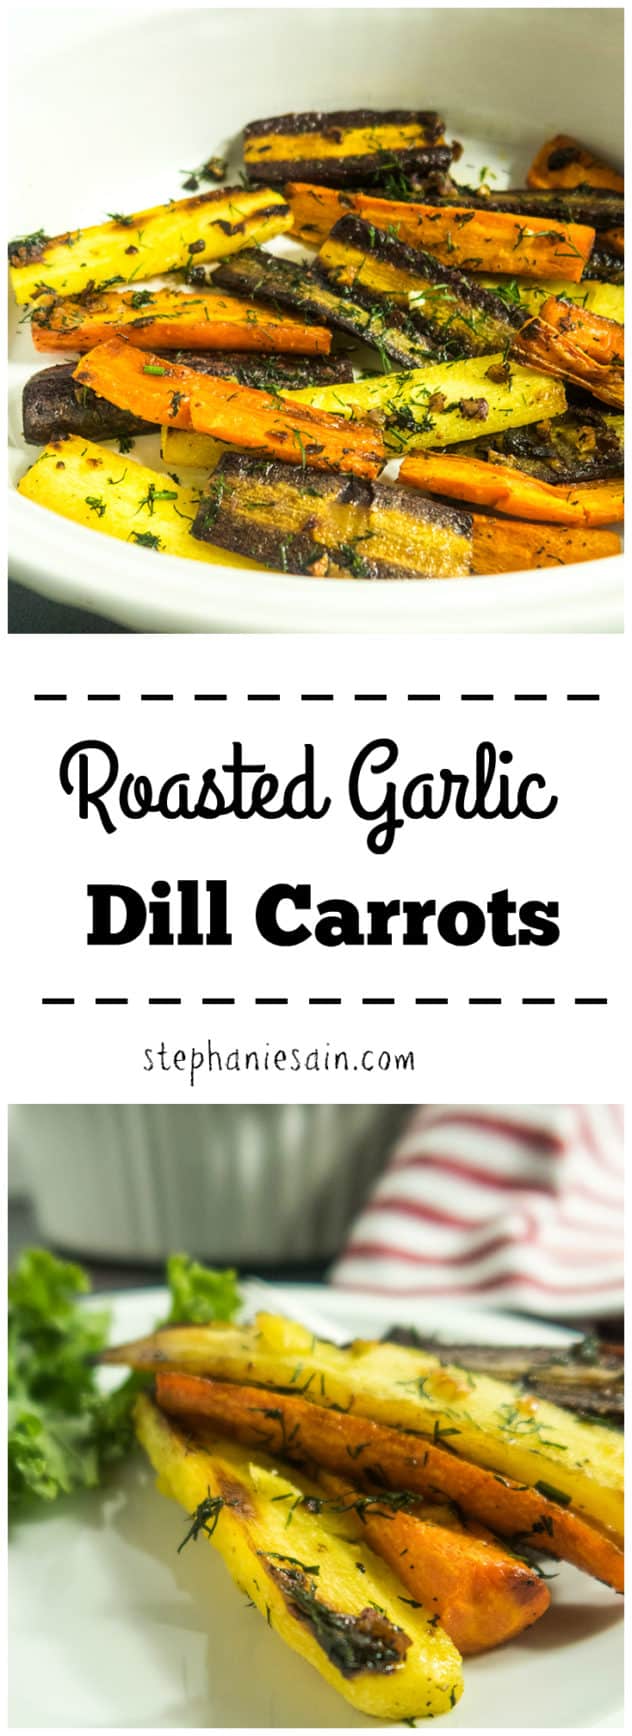 Roasted Garlic Dill Carrots are tossed in a buttery garlic sauce and topped with dill for an easy tasty side perfect for any occasion. Vegetarian & Gluten Free.